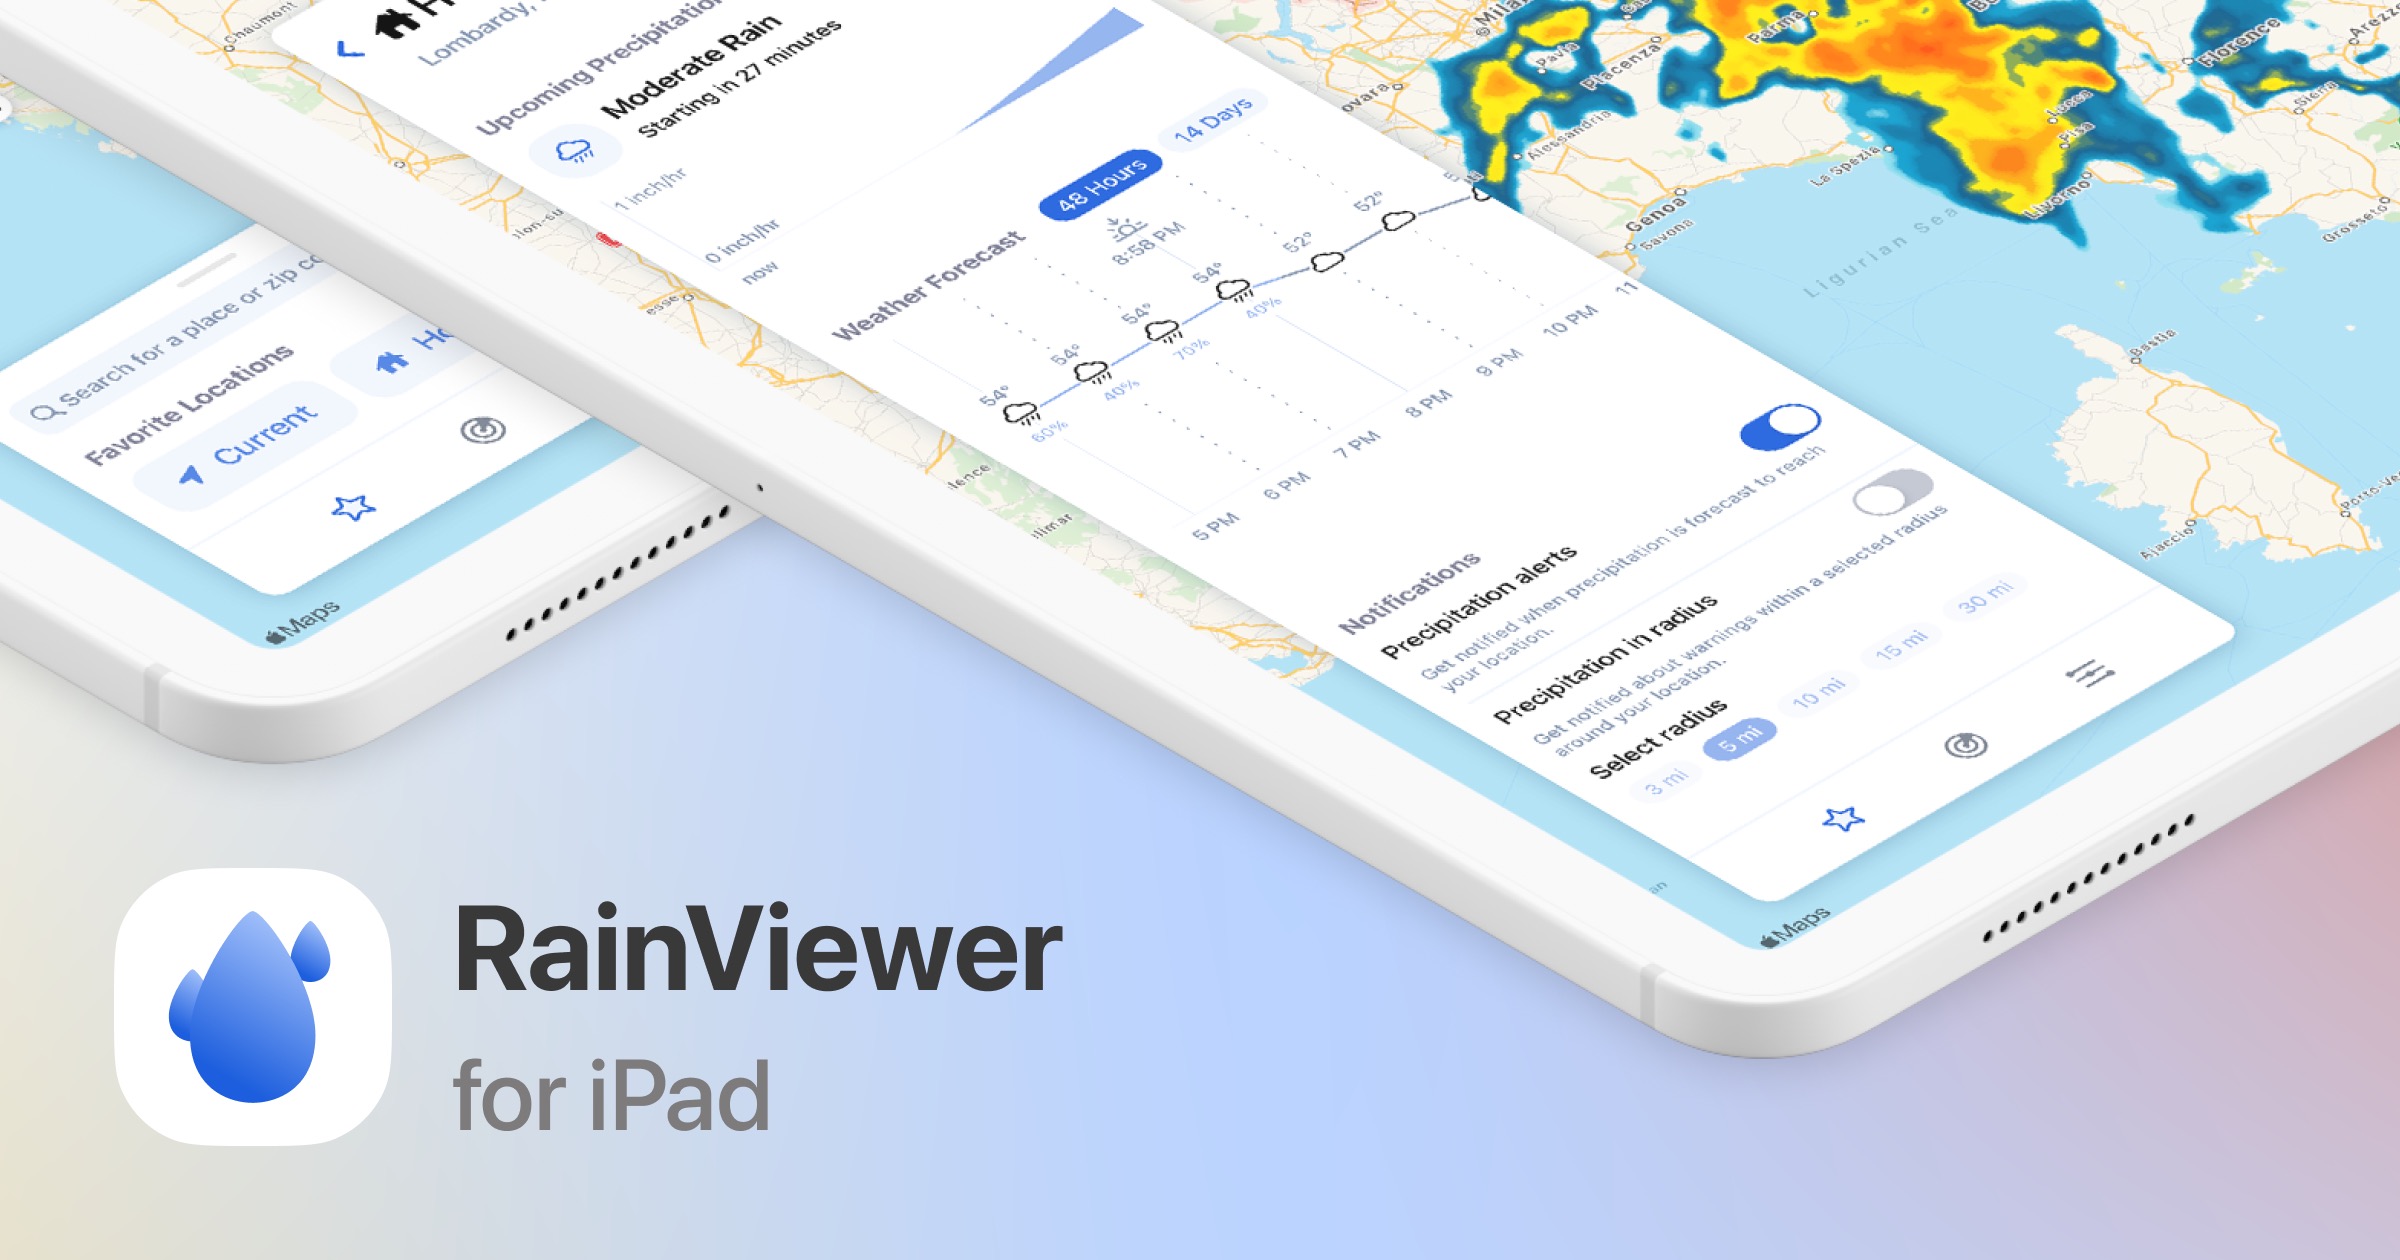 The RainViewer Weather App is Now a Full iPad App With Widgets